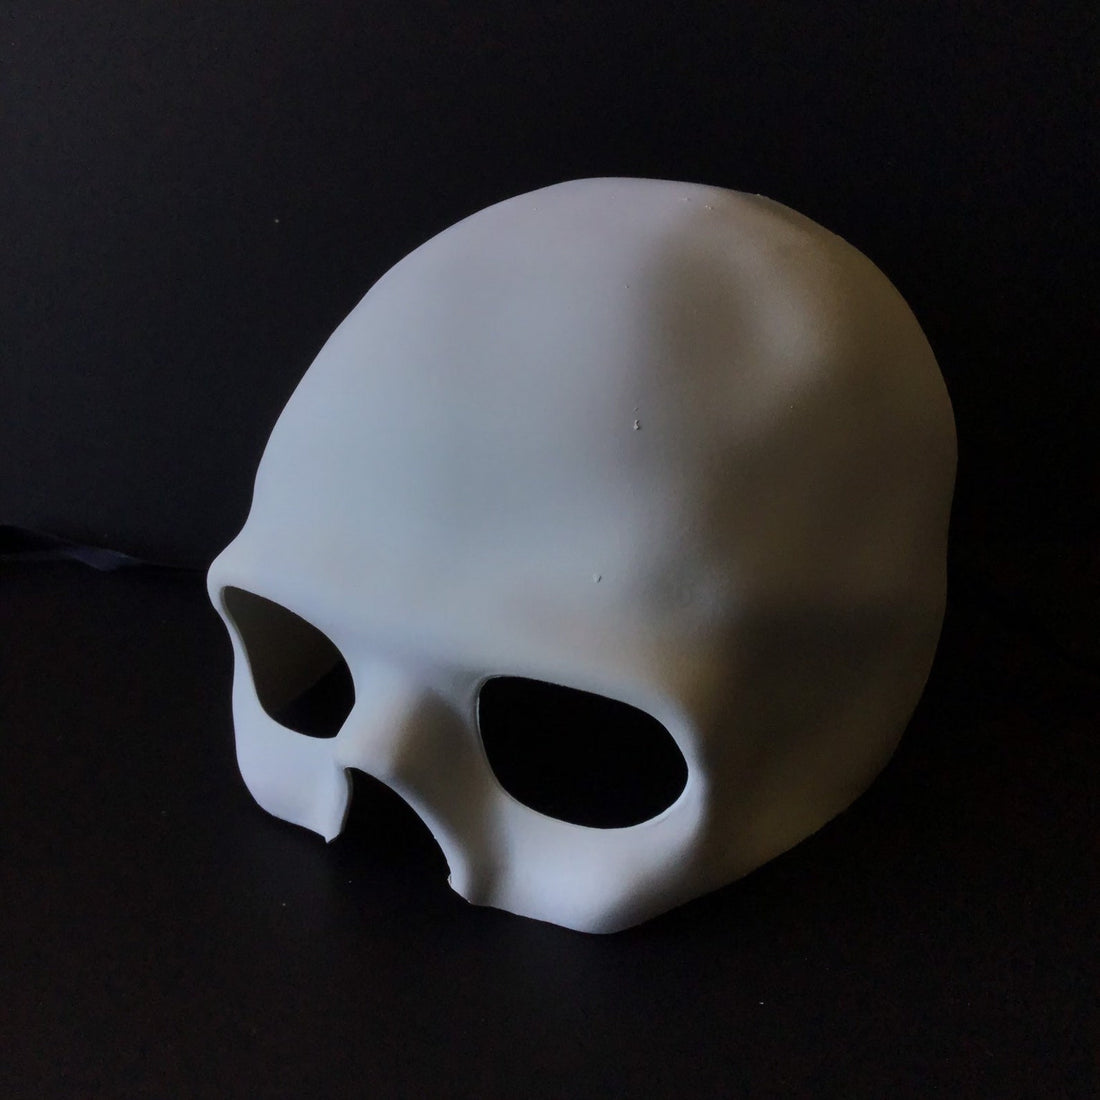 Blank white skull masquerade mask for DIY projects.